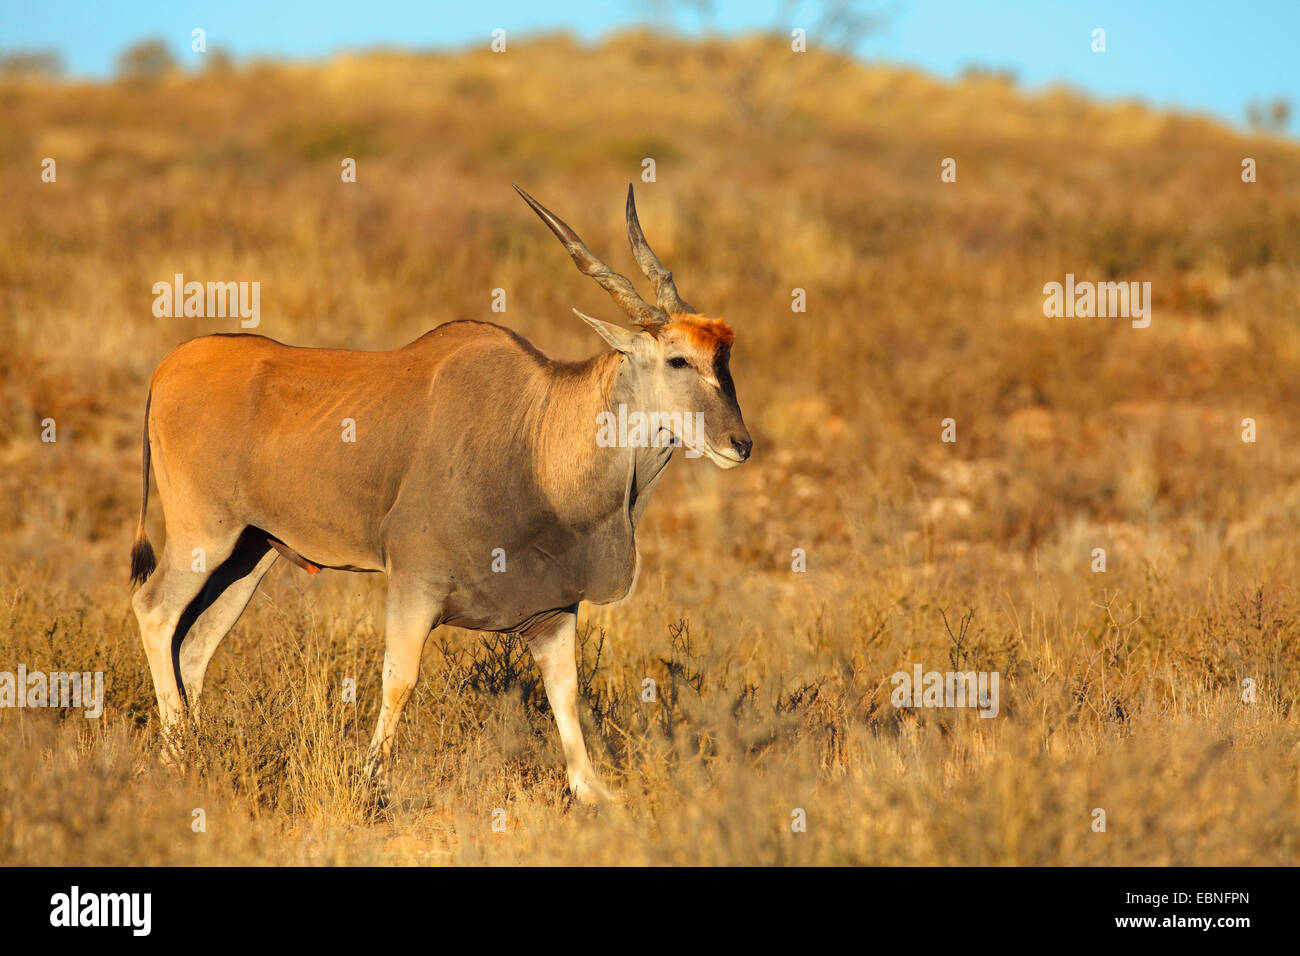 Common eland, Southern Eland (Taurotragus oryx, Tragelaphus oryx), male walking in the desert, South Africa, Kgalagadi Transfrontier National Park Stock Photo